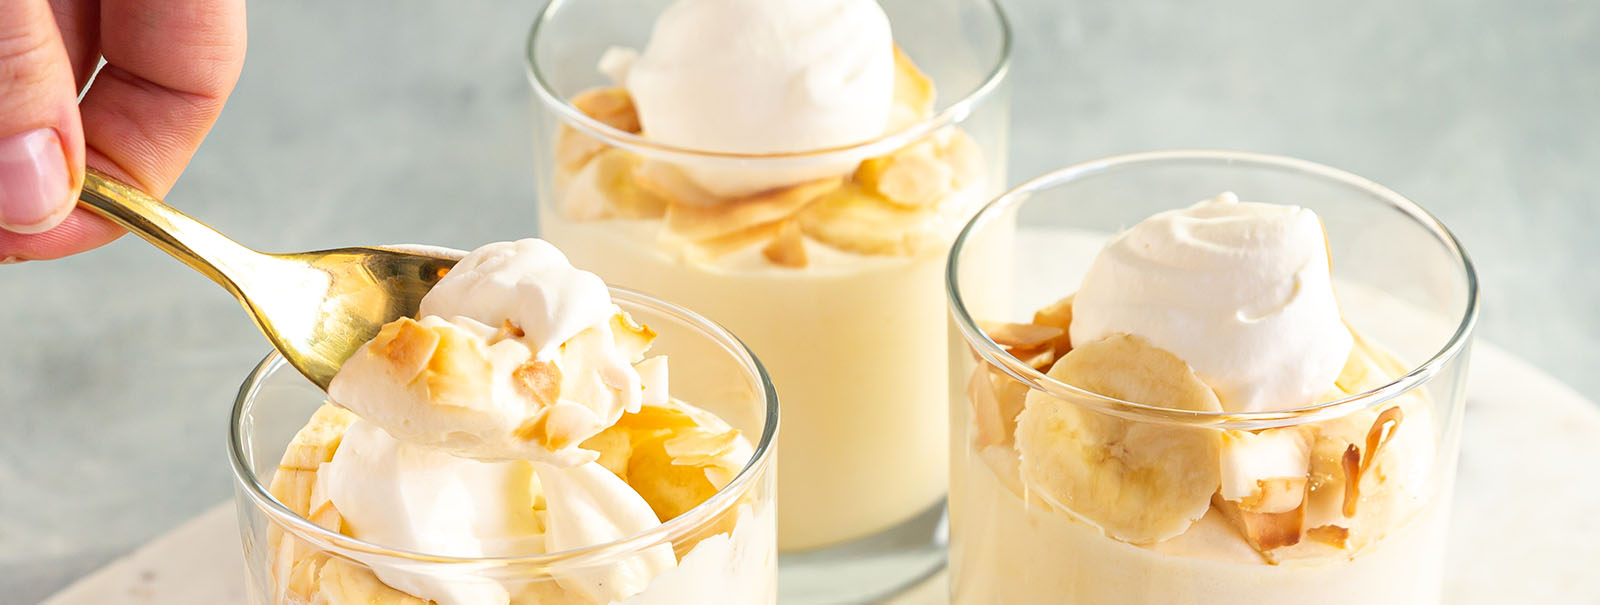 Wallaby's Banana Mousse Recipe